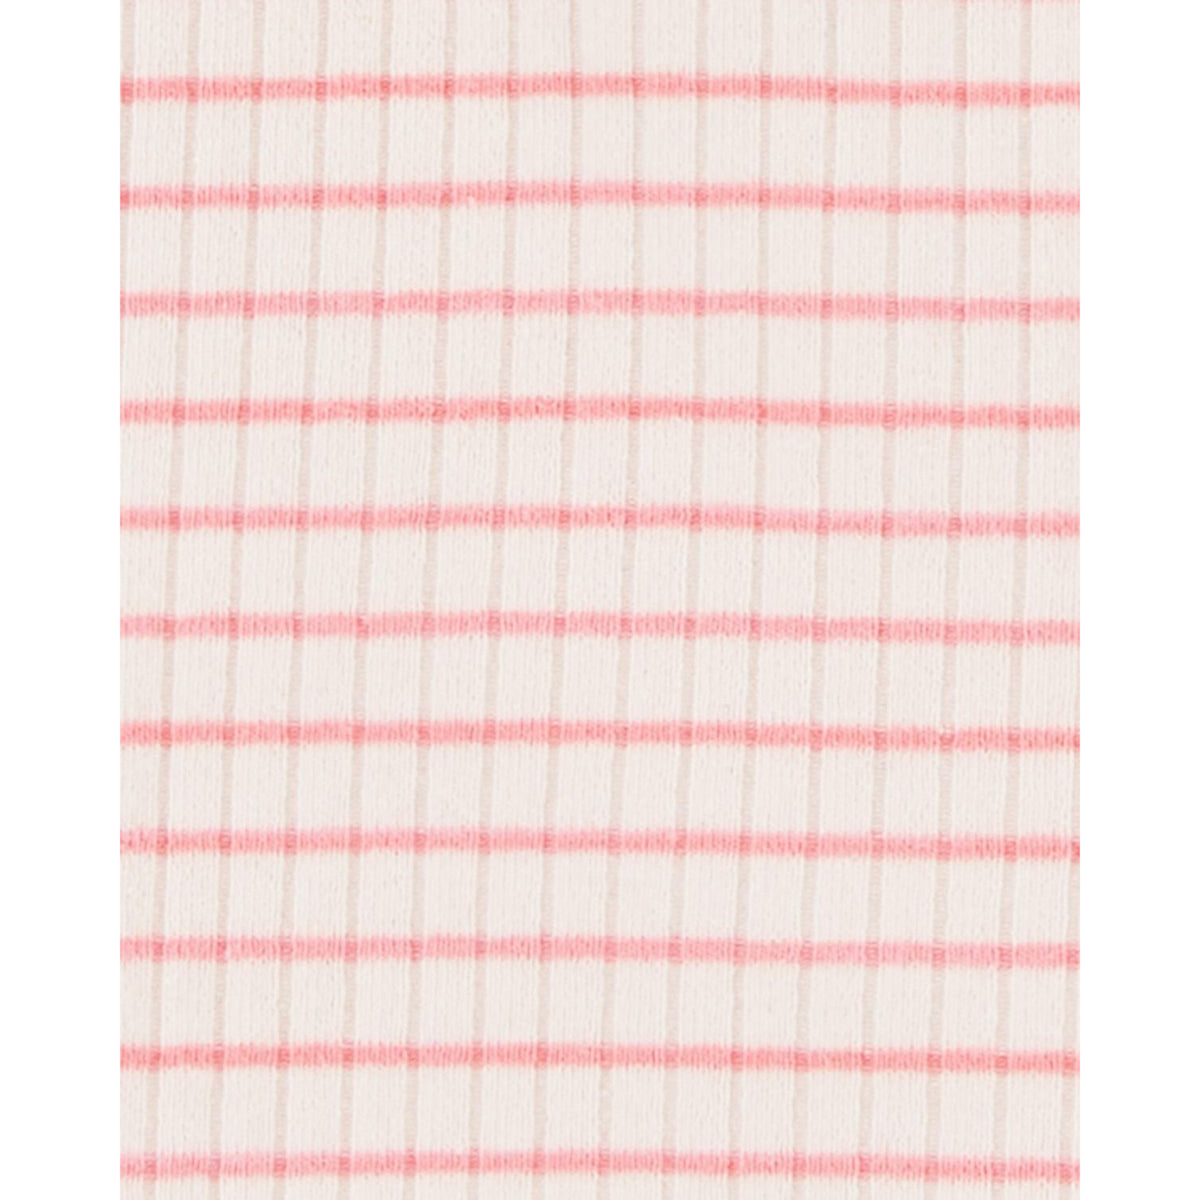 Carter's pink and white striped 2-piece set (6M-24M)